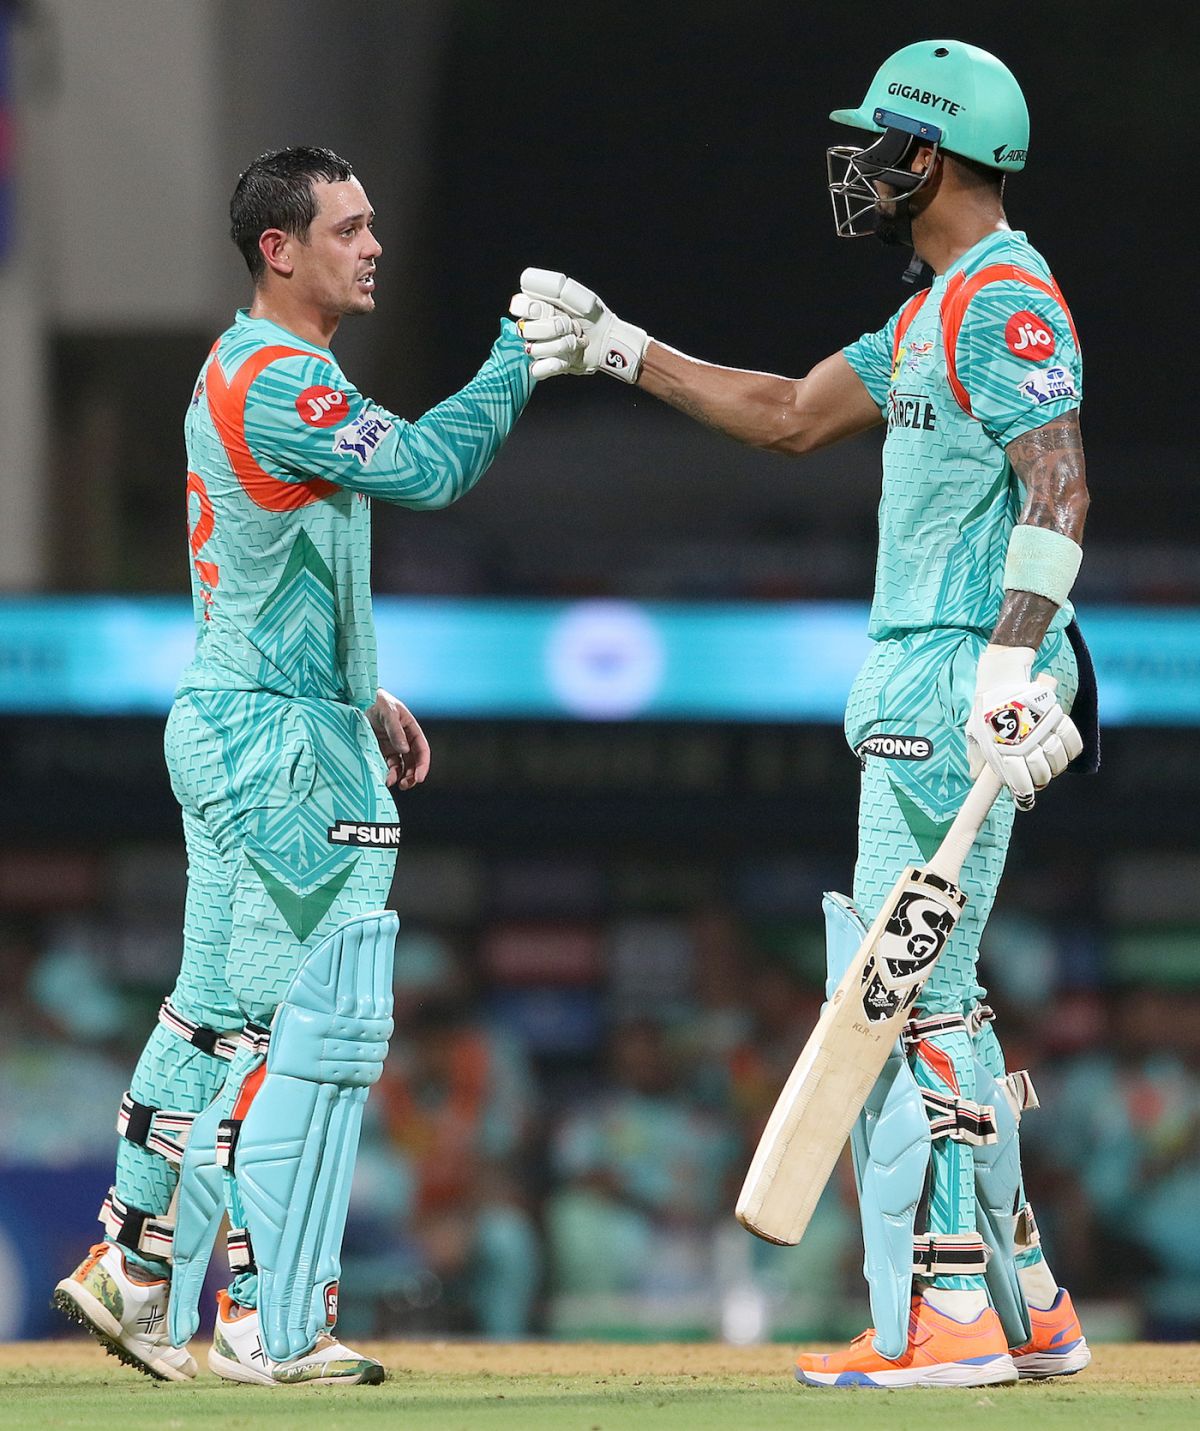 Quinton de Kock and KL Rahul put up a record 210 runs for the unbroken first wicket, Kolkata Knight Riders vs Lucknow Super Giants, IPL 2022, DY Patil Stadium, Mumbai, May 18, 2022